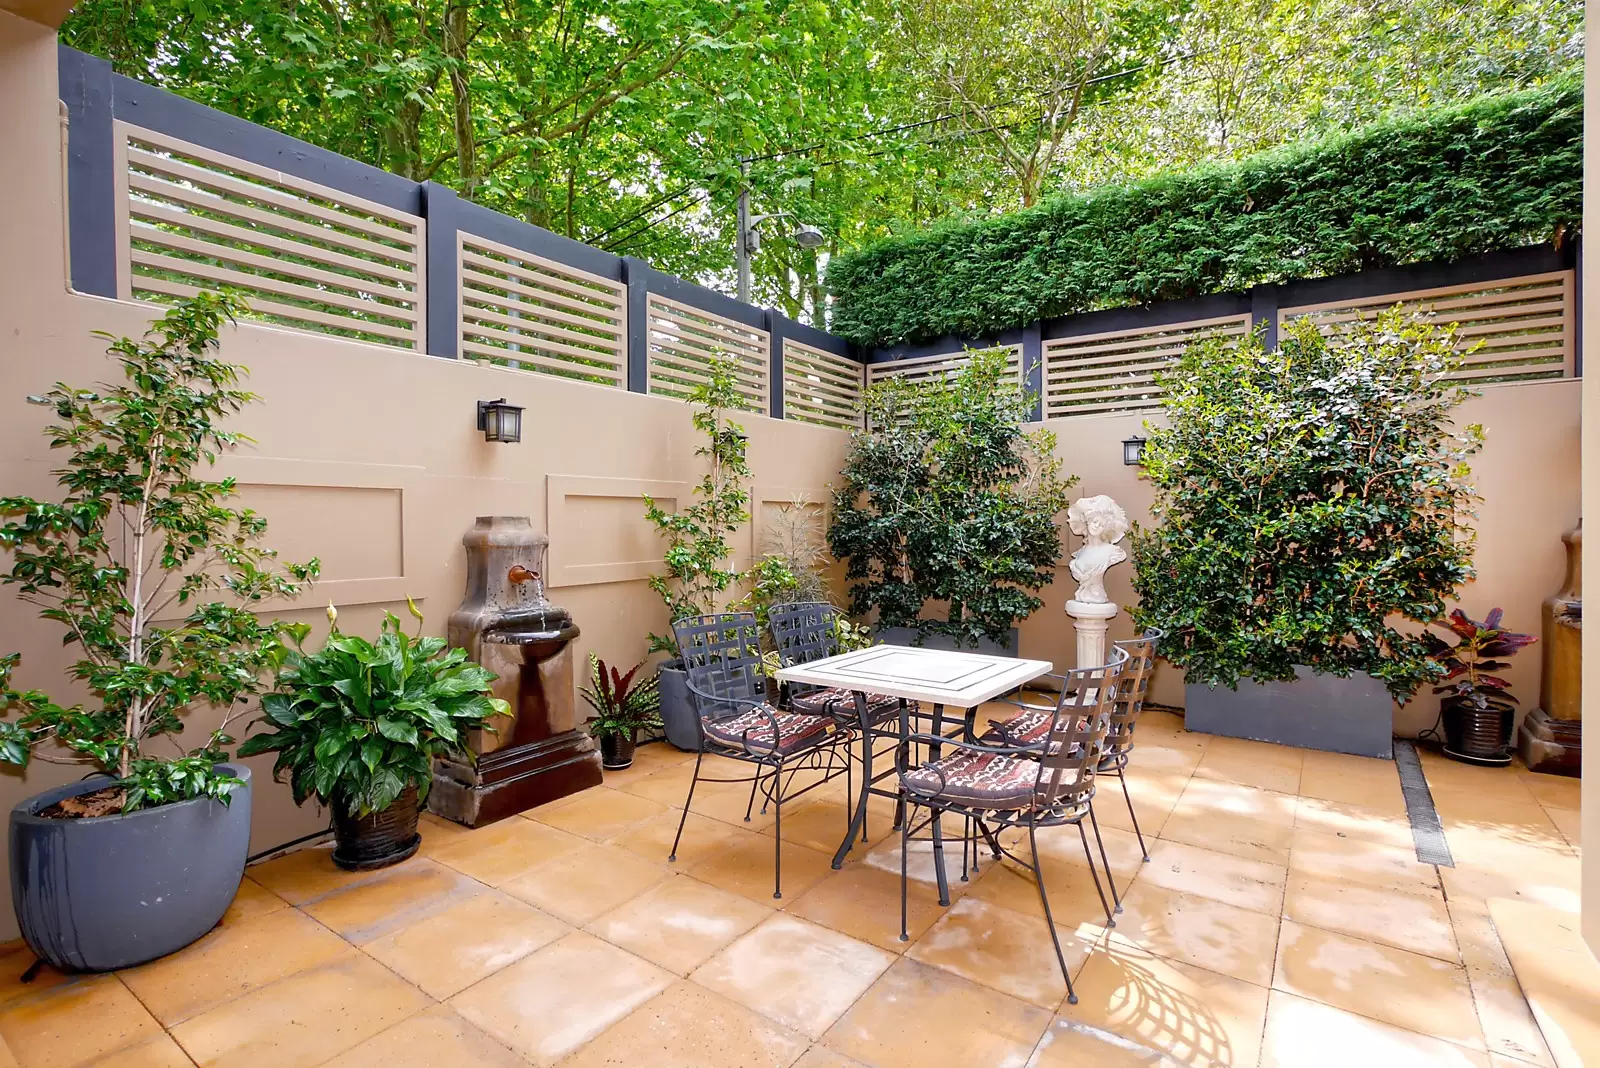 Photo #9: 1/64 Ocean Street, Woollahra - Sold by Sydney Sotheby's International Realty